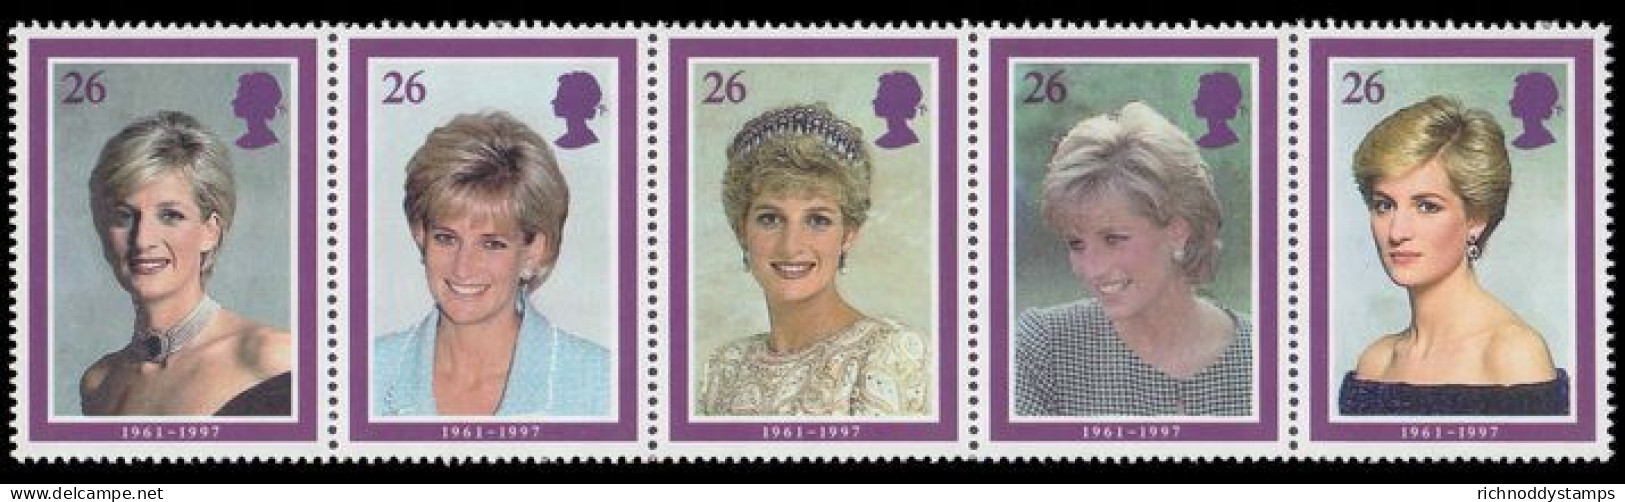 1998 Diana, Princess Of Wales Unmounted Mint. - Unused Stamps